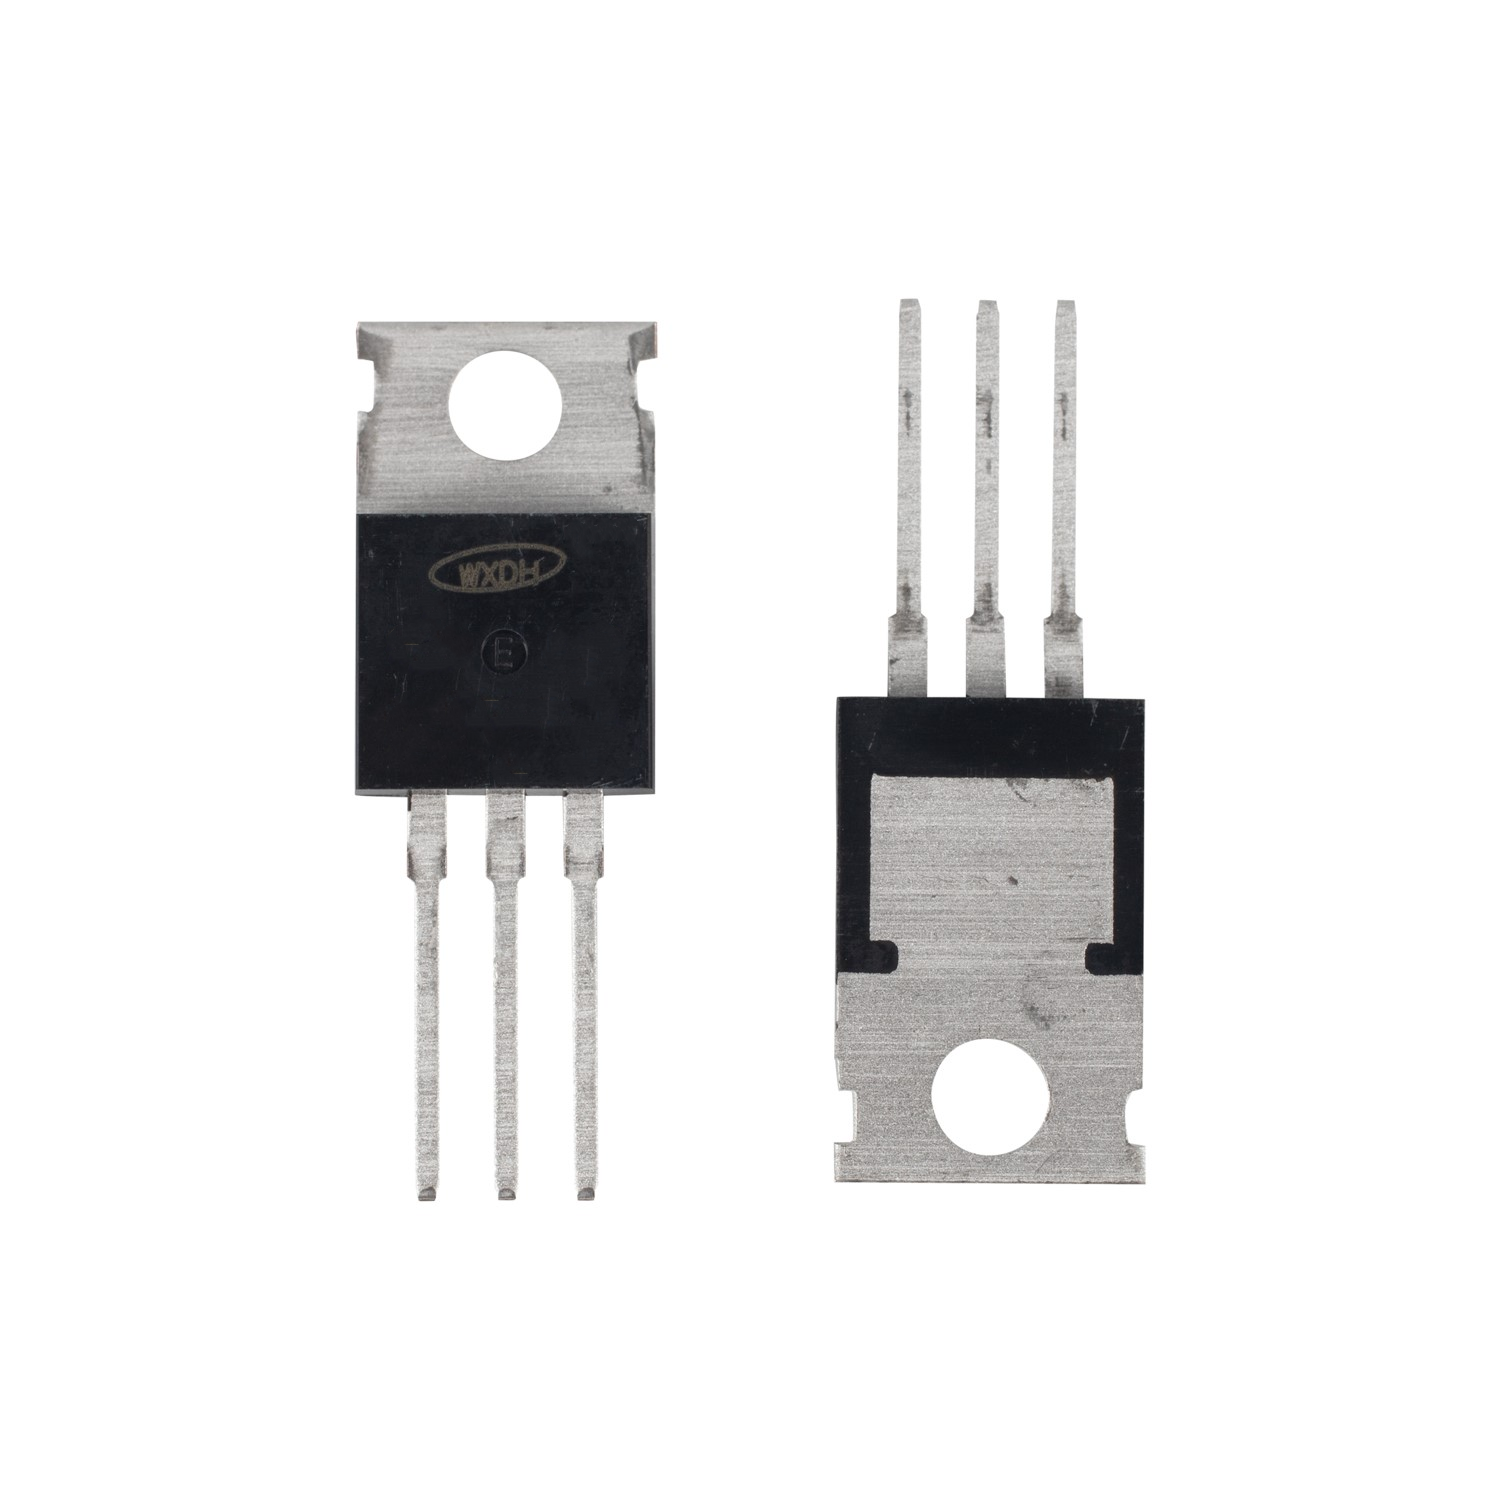 N-channel Enhancement Mode Power MOSFET 120A 85V 